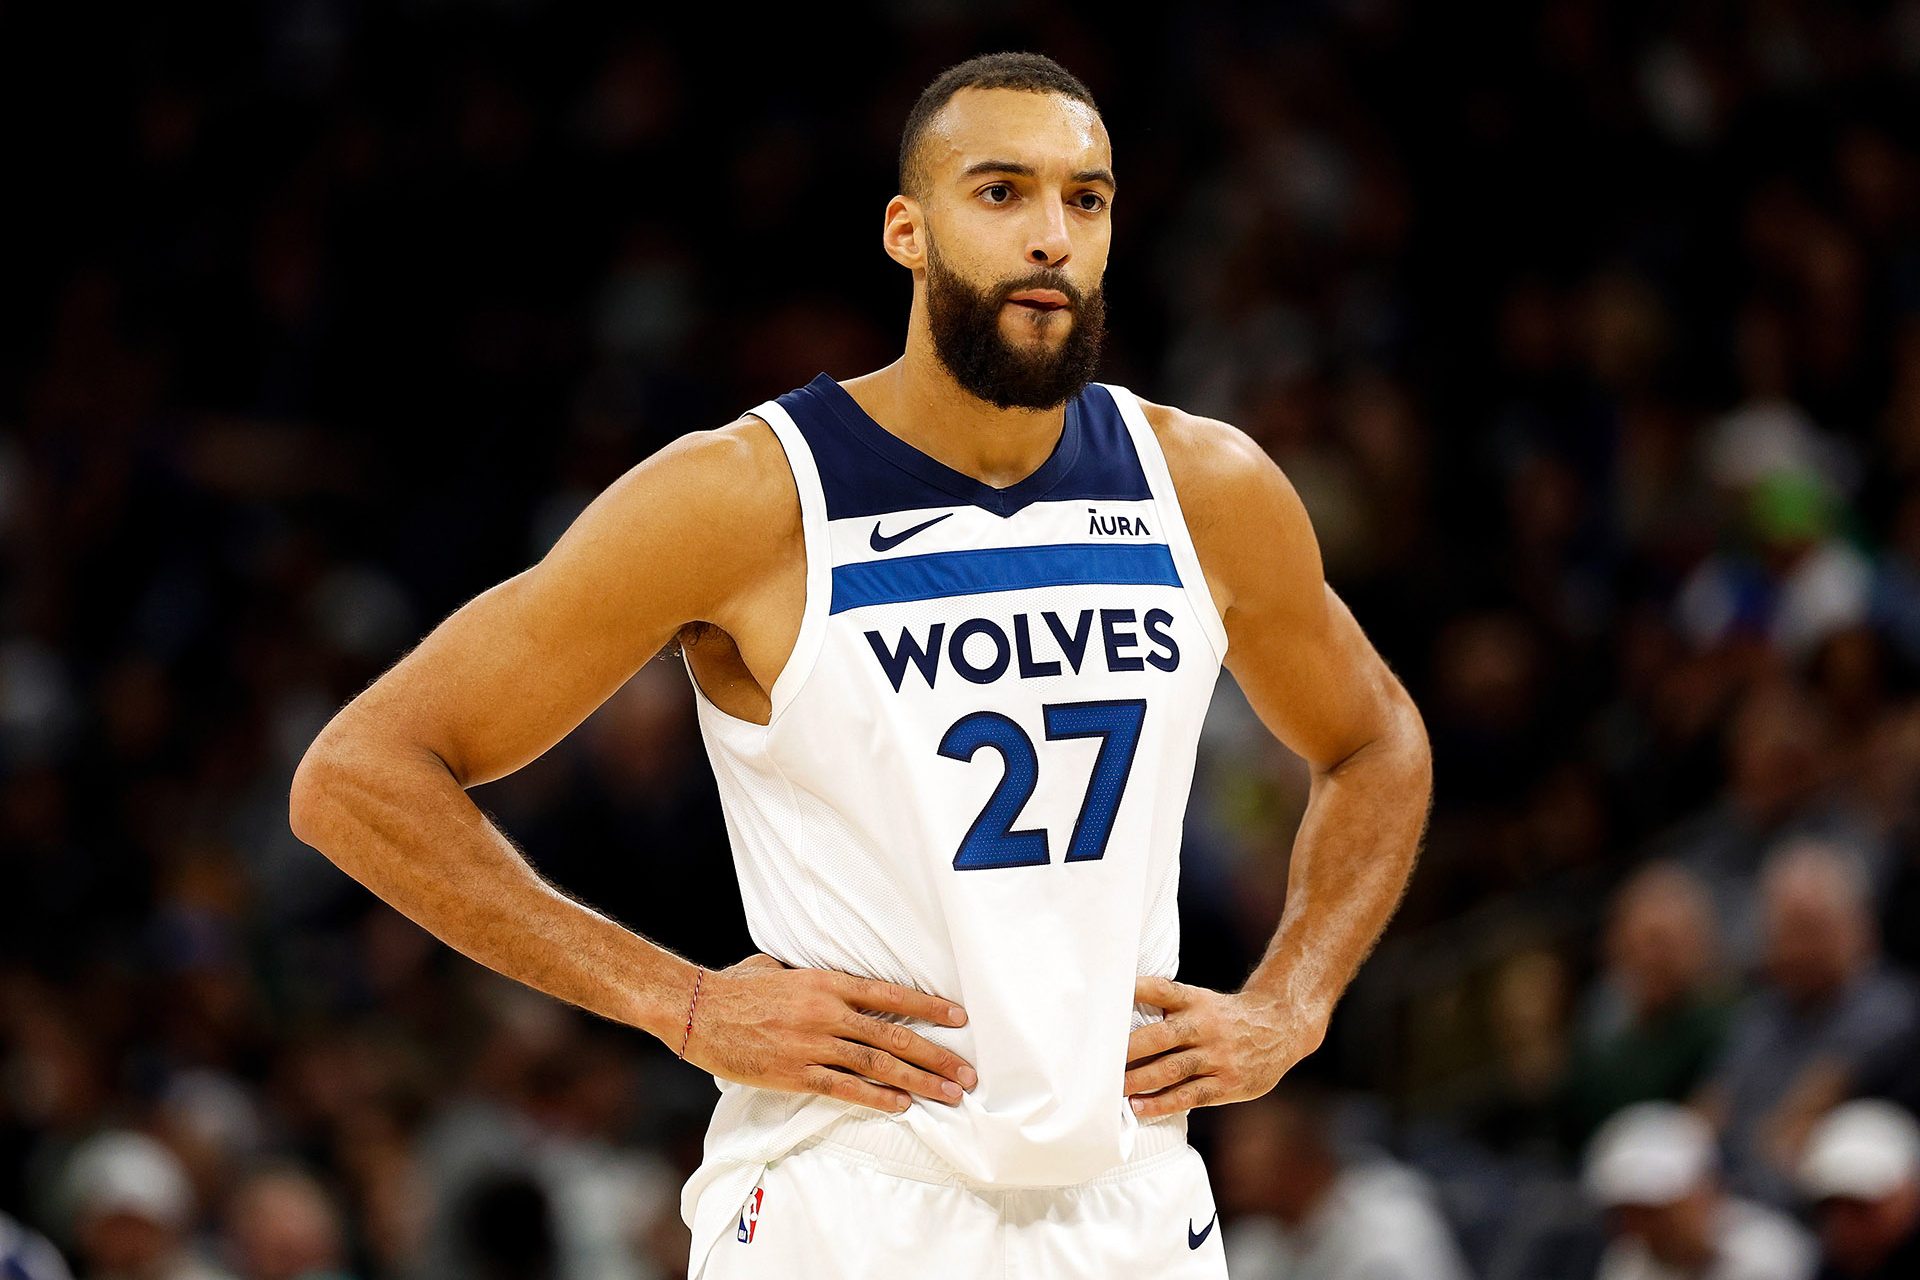 Minnesota Timberwolves: Stagger Minutes Effectively